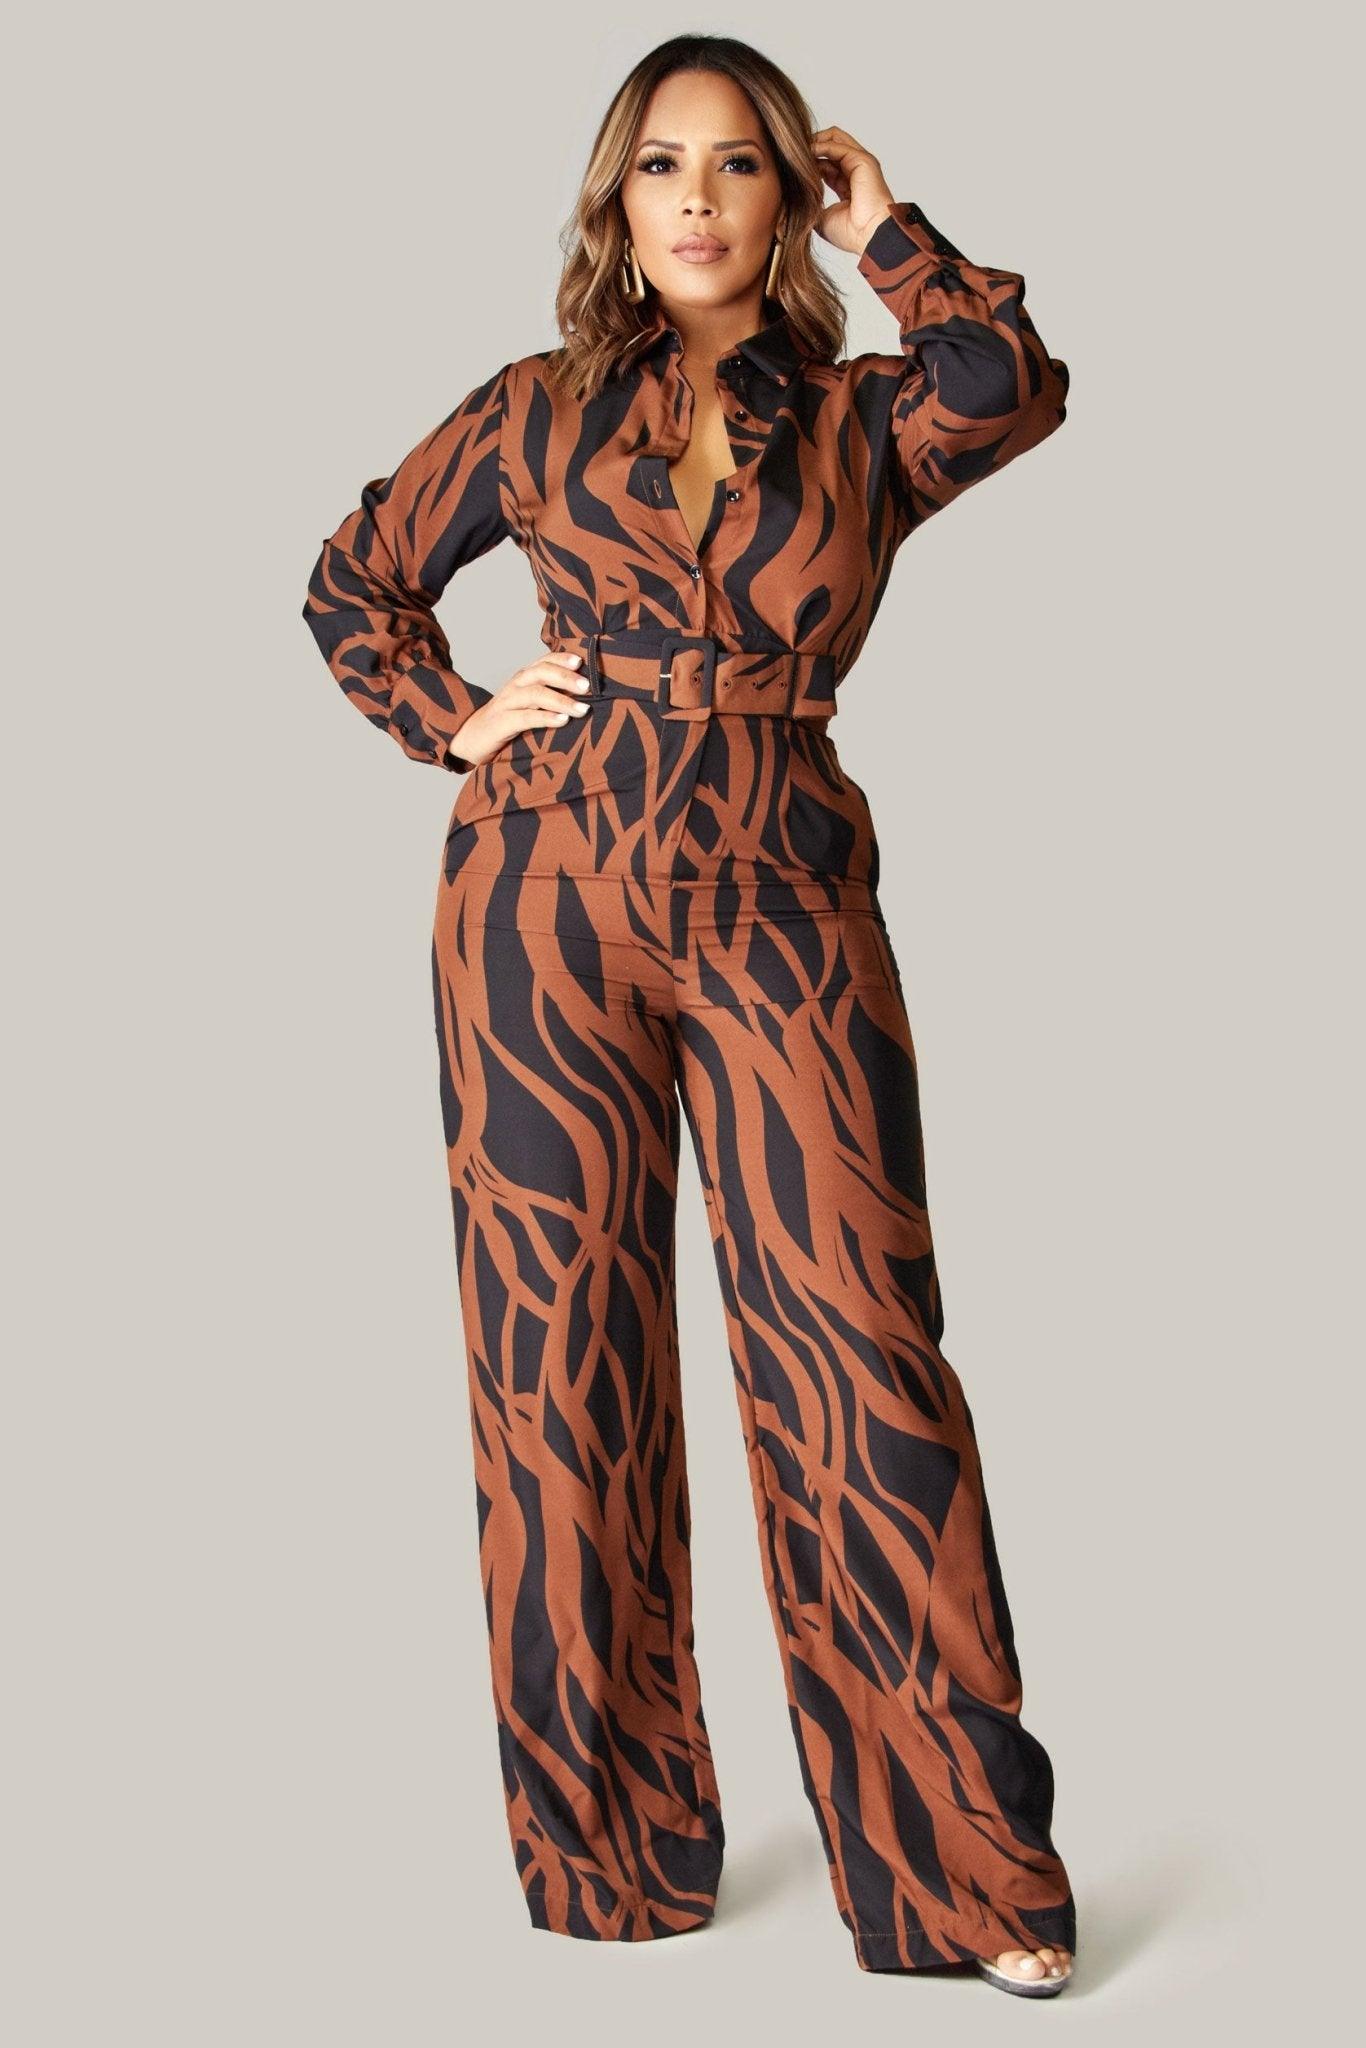 Amani Belted Jumpsuit - MY SEXY STYLES